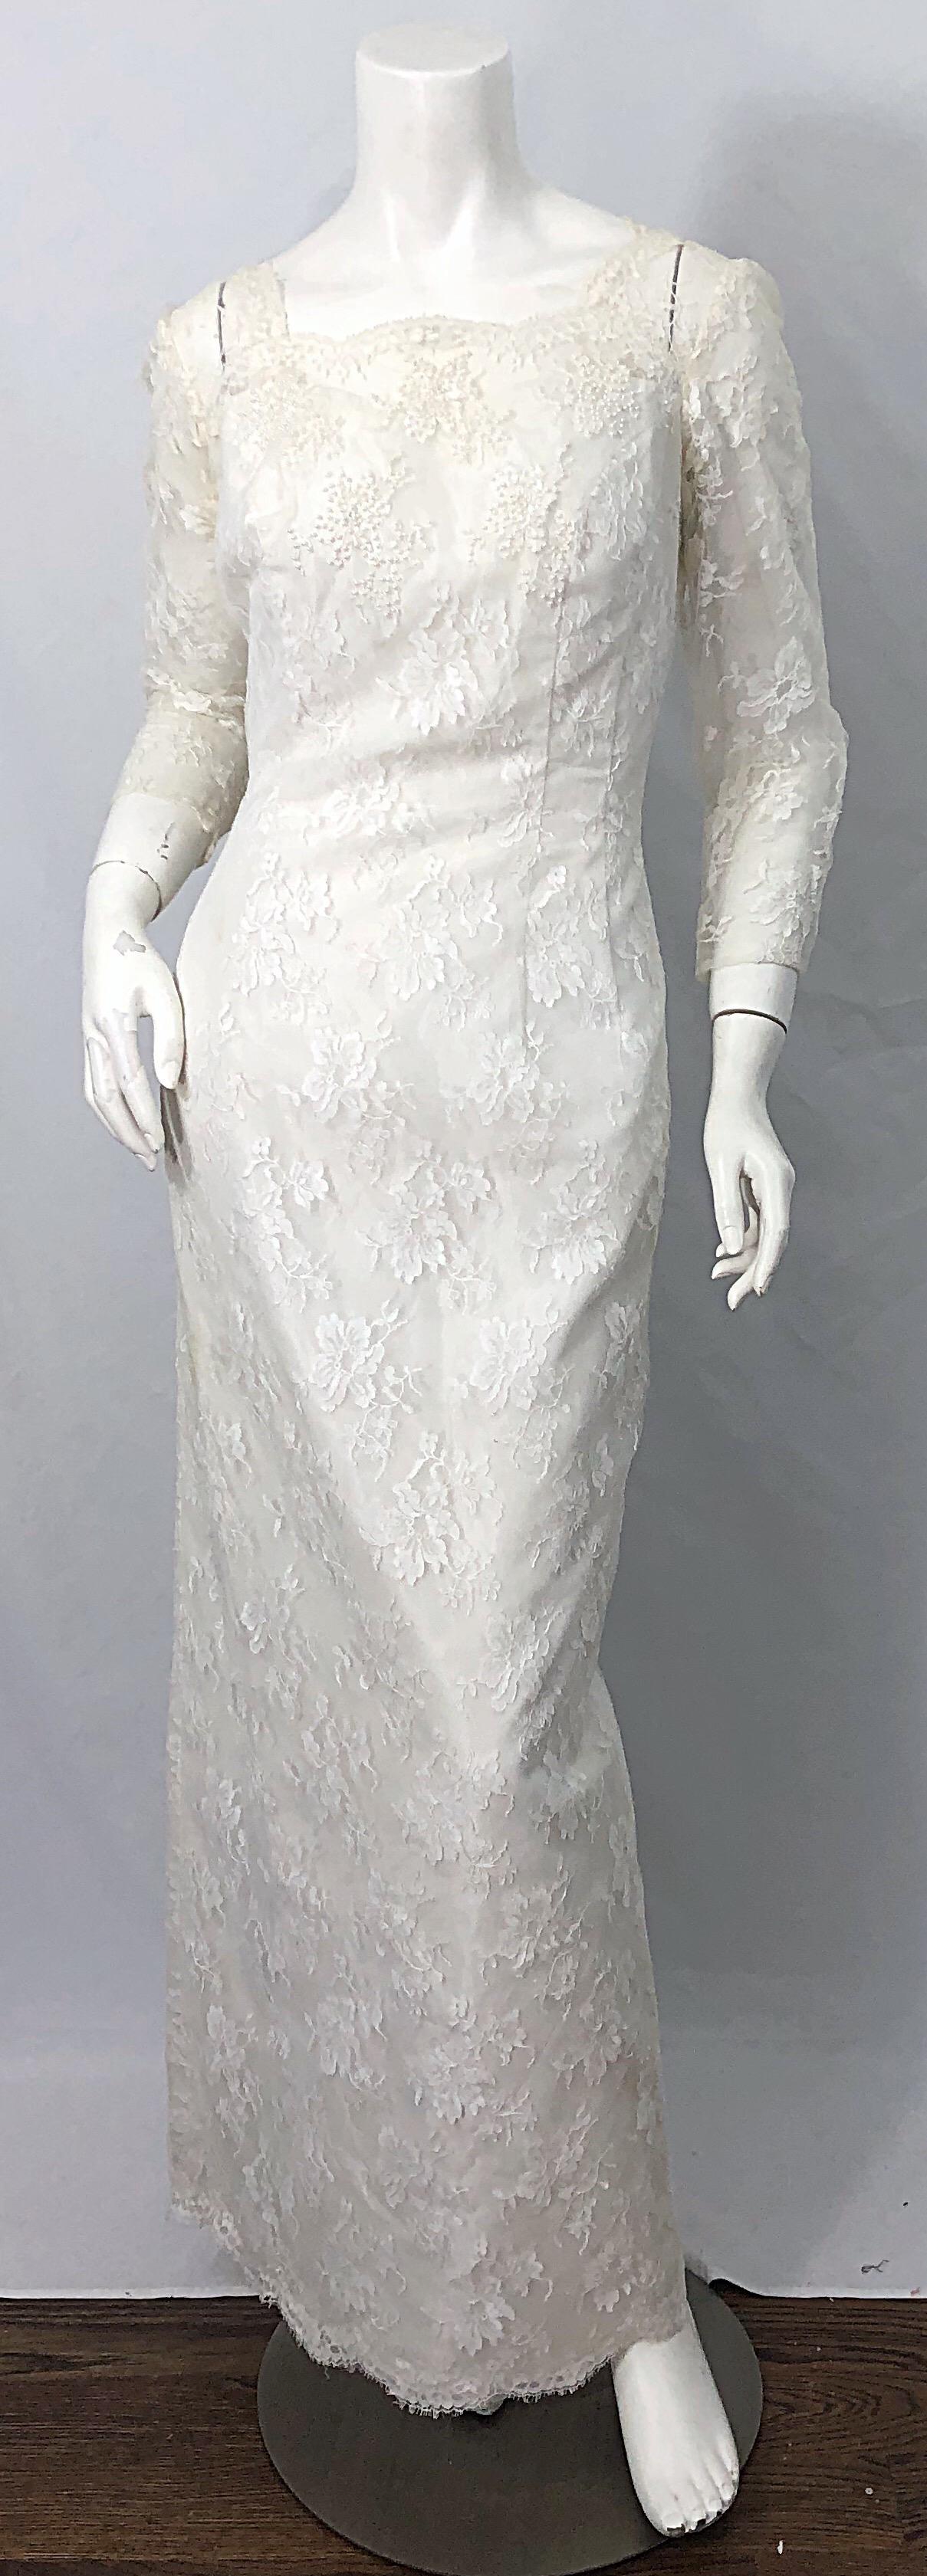 Beautiful early 60s AN ORIGINAL BY CONSTANTINO white beaded, sequin, pearl long sleeve silk lace wedding dress ! Couture quality, with so much attention to details. Silk taffeta with white French lace overlay. Thousands of hand-sewn beads and